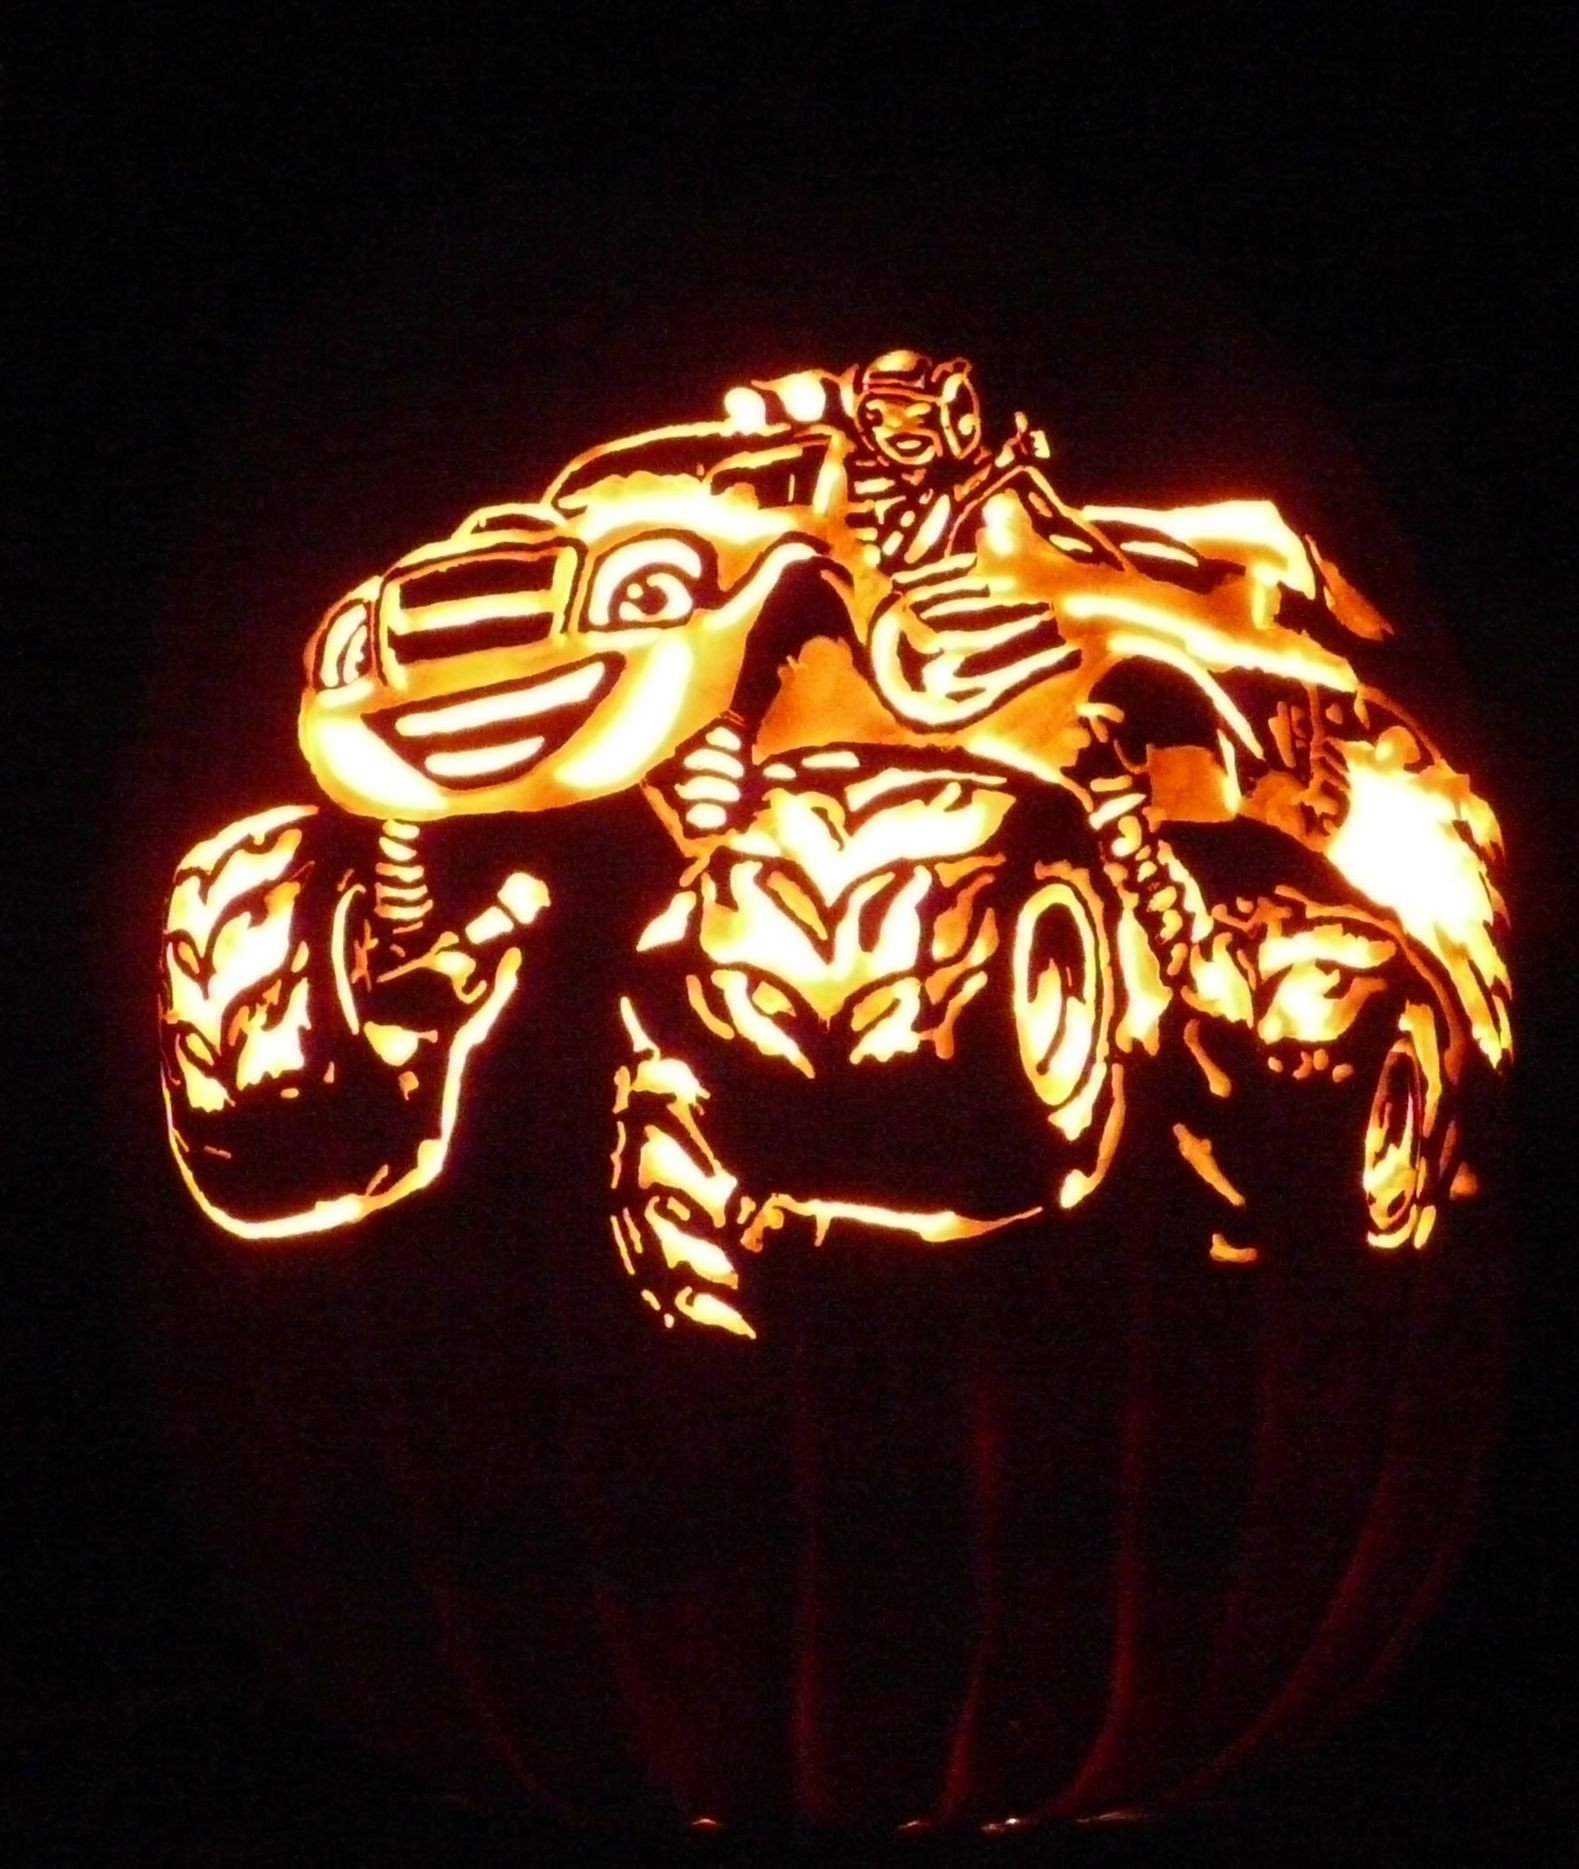 Blaze Pumpkin Carving there Was A Special Request for A Blaze and the Monster